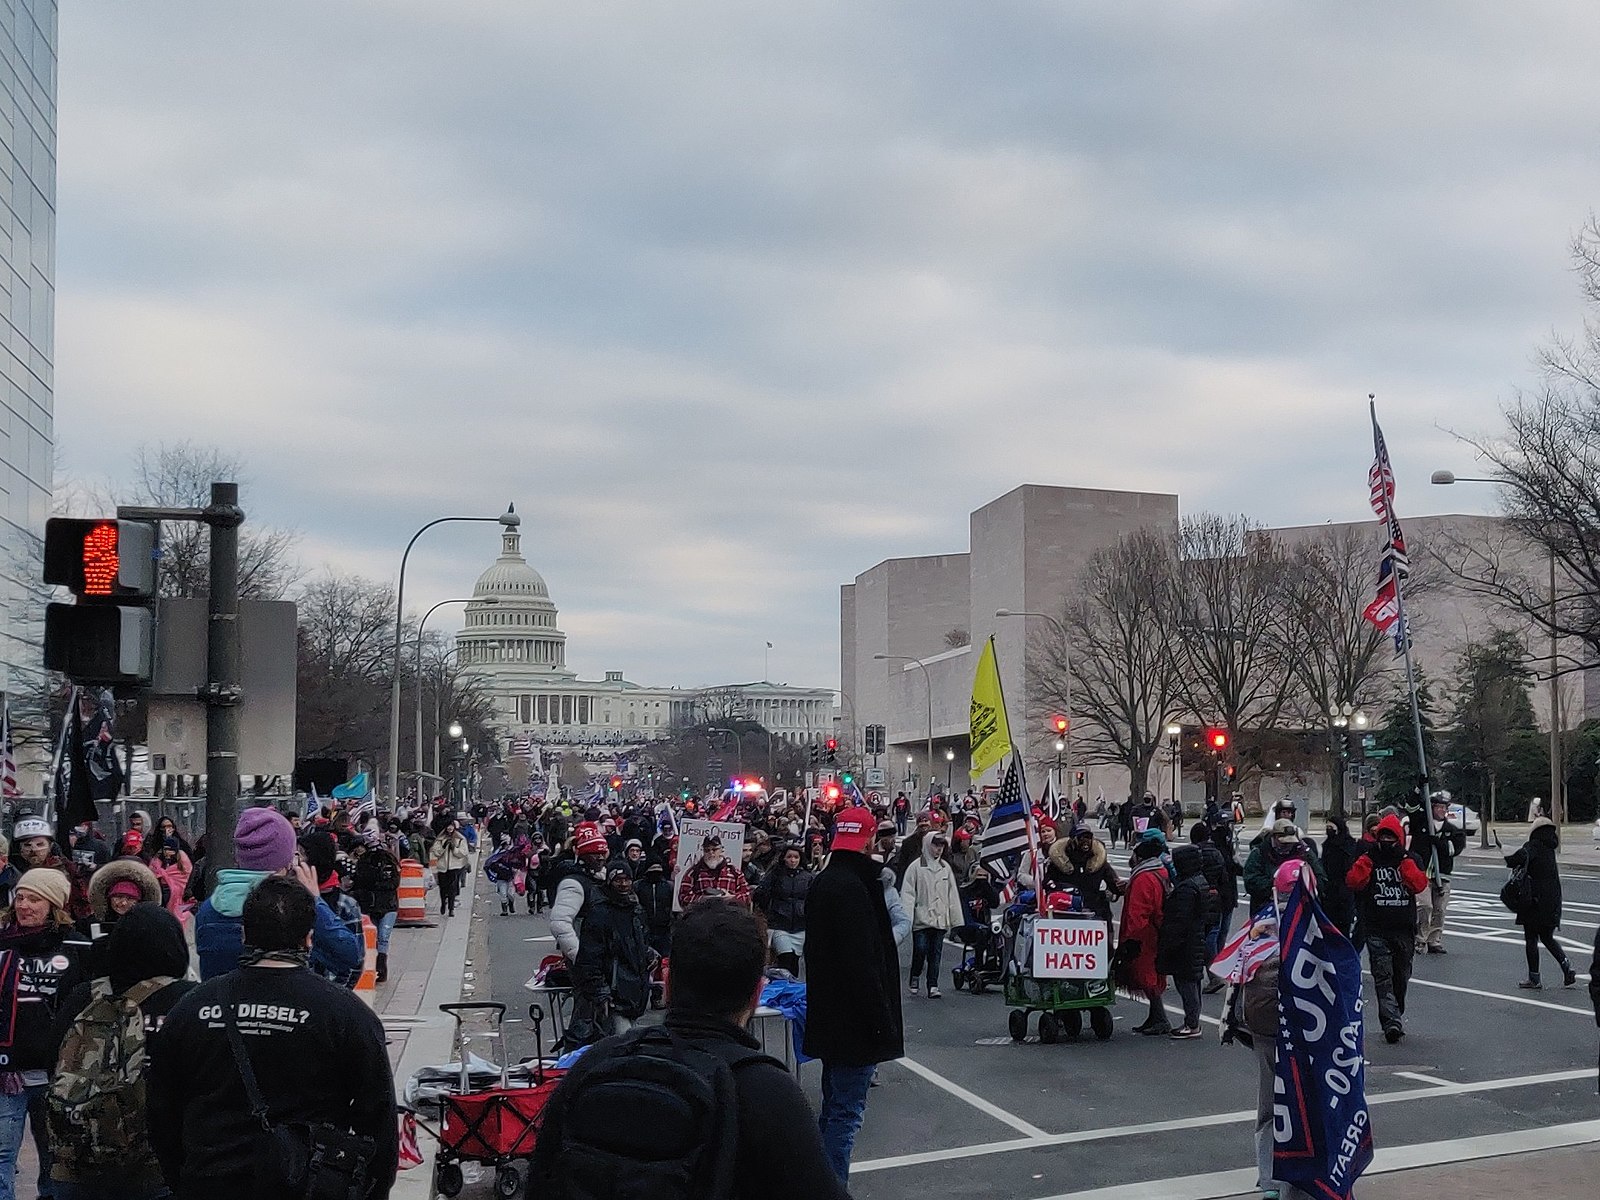 A crowd of people in the street leading to the Capitol building. Some carry flags and wear apparel with Trump's name and slogans.